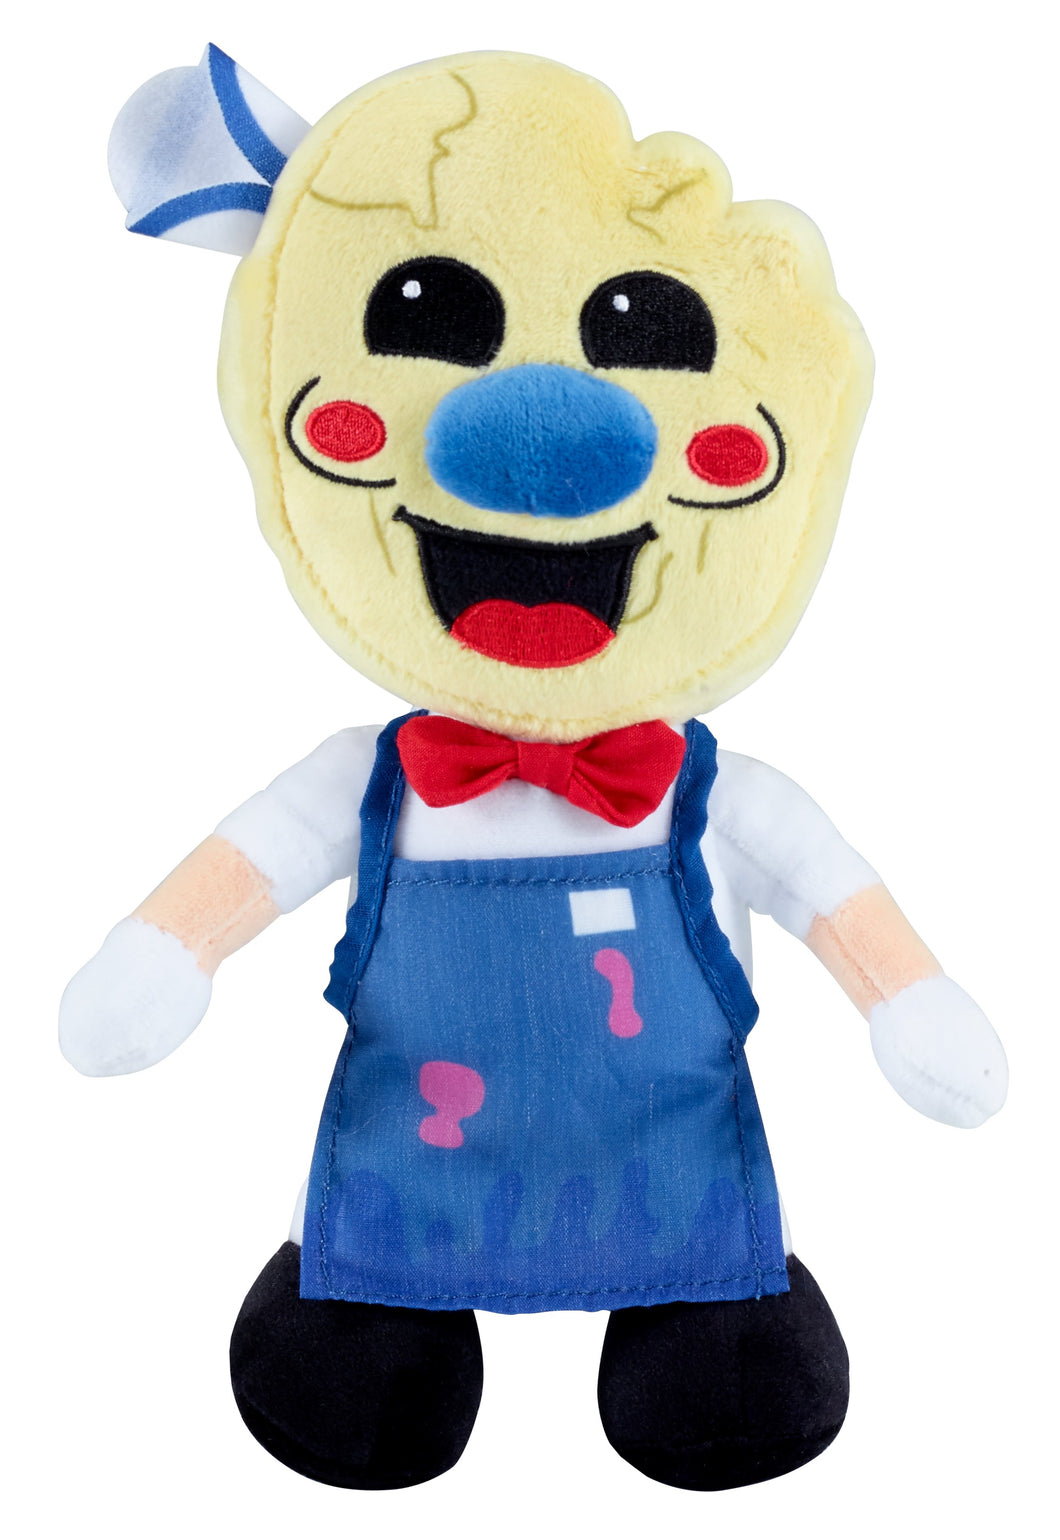 FRENEMIES – Rod from Ice Scream – Collectible Plush (8” Tall, Series 1)